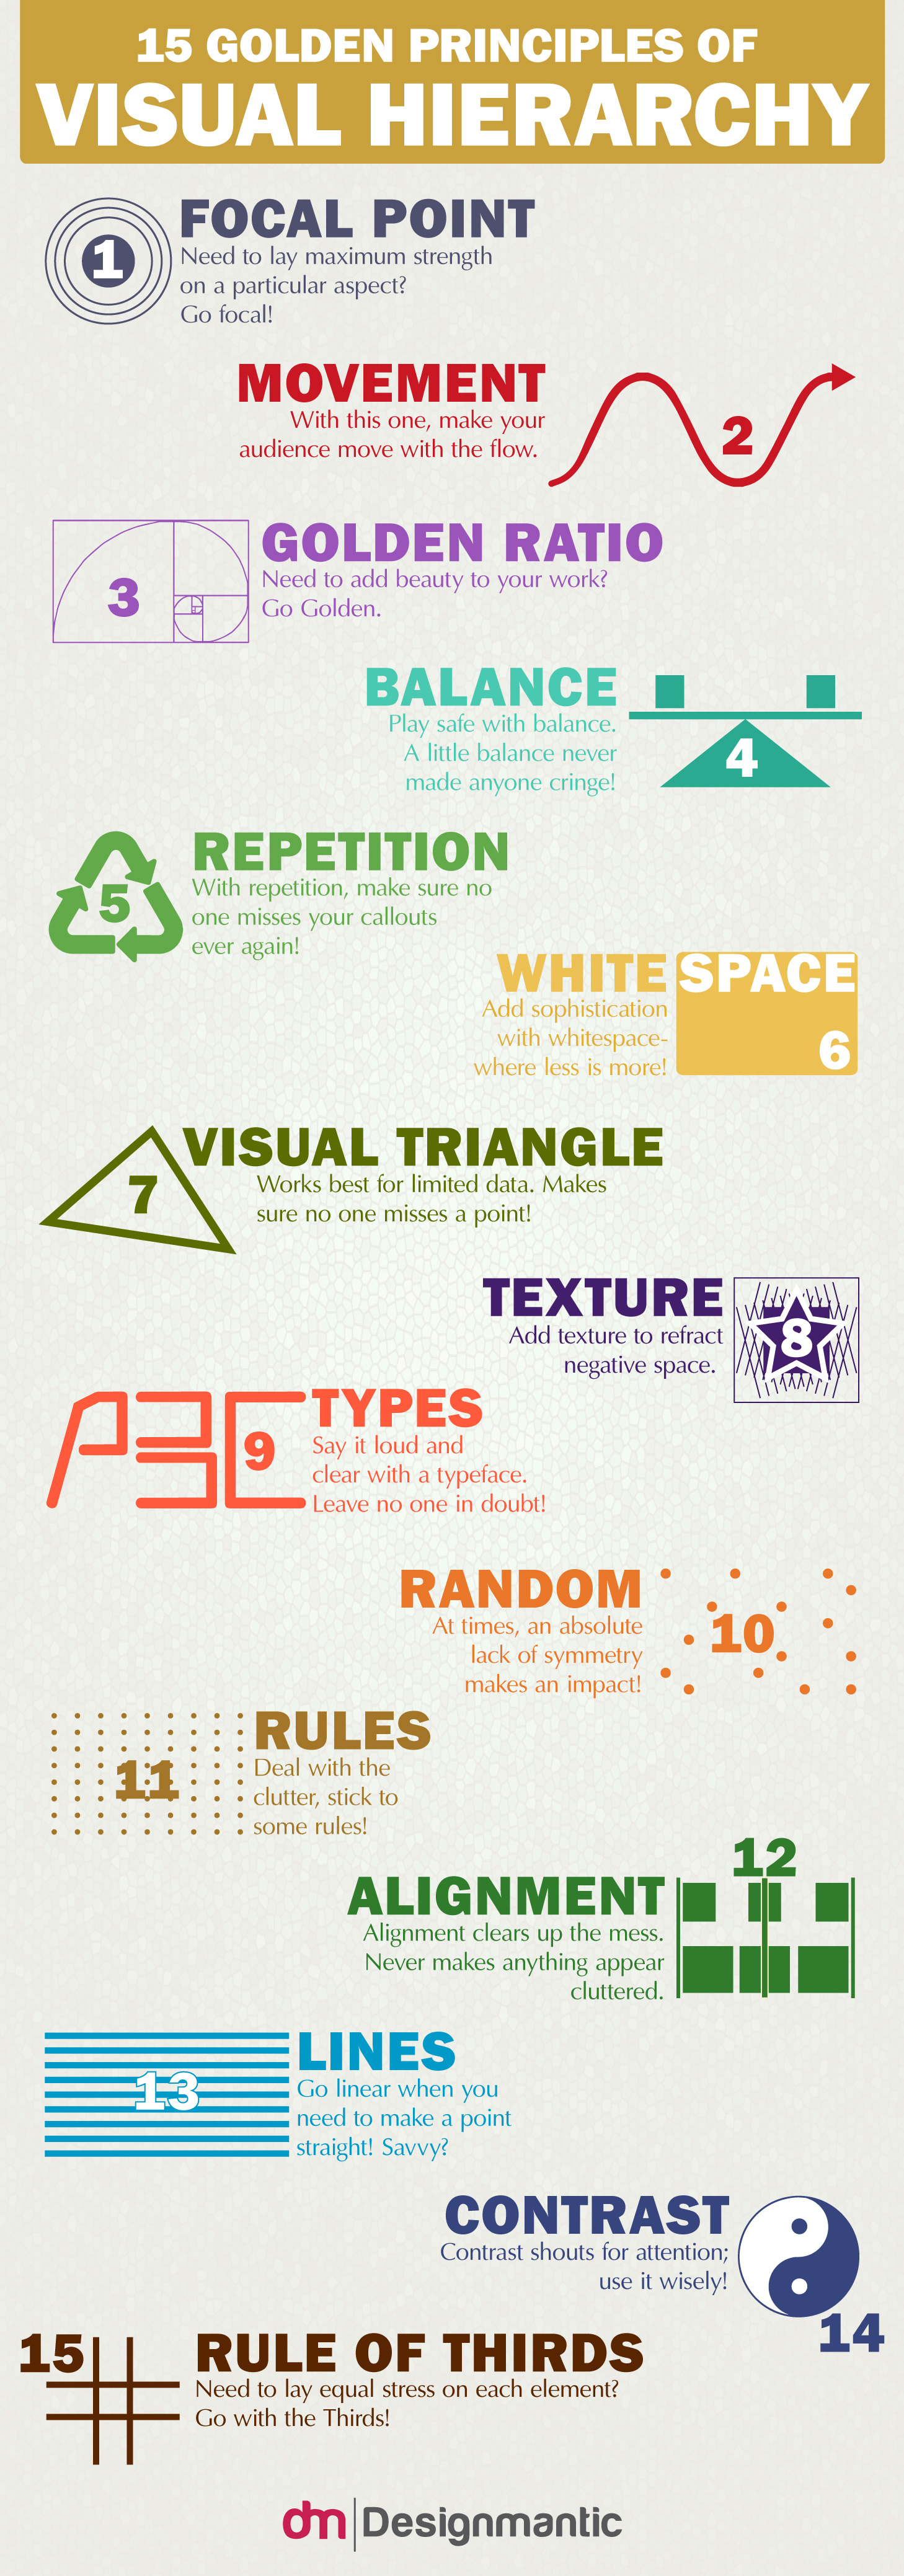 Golden Rules of Visual Hierarchy